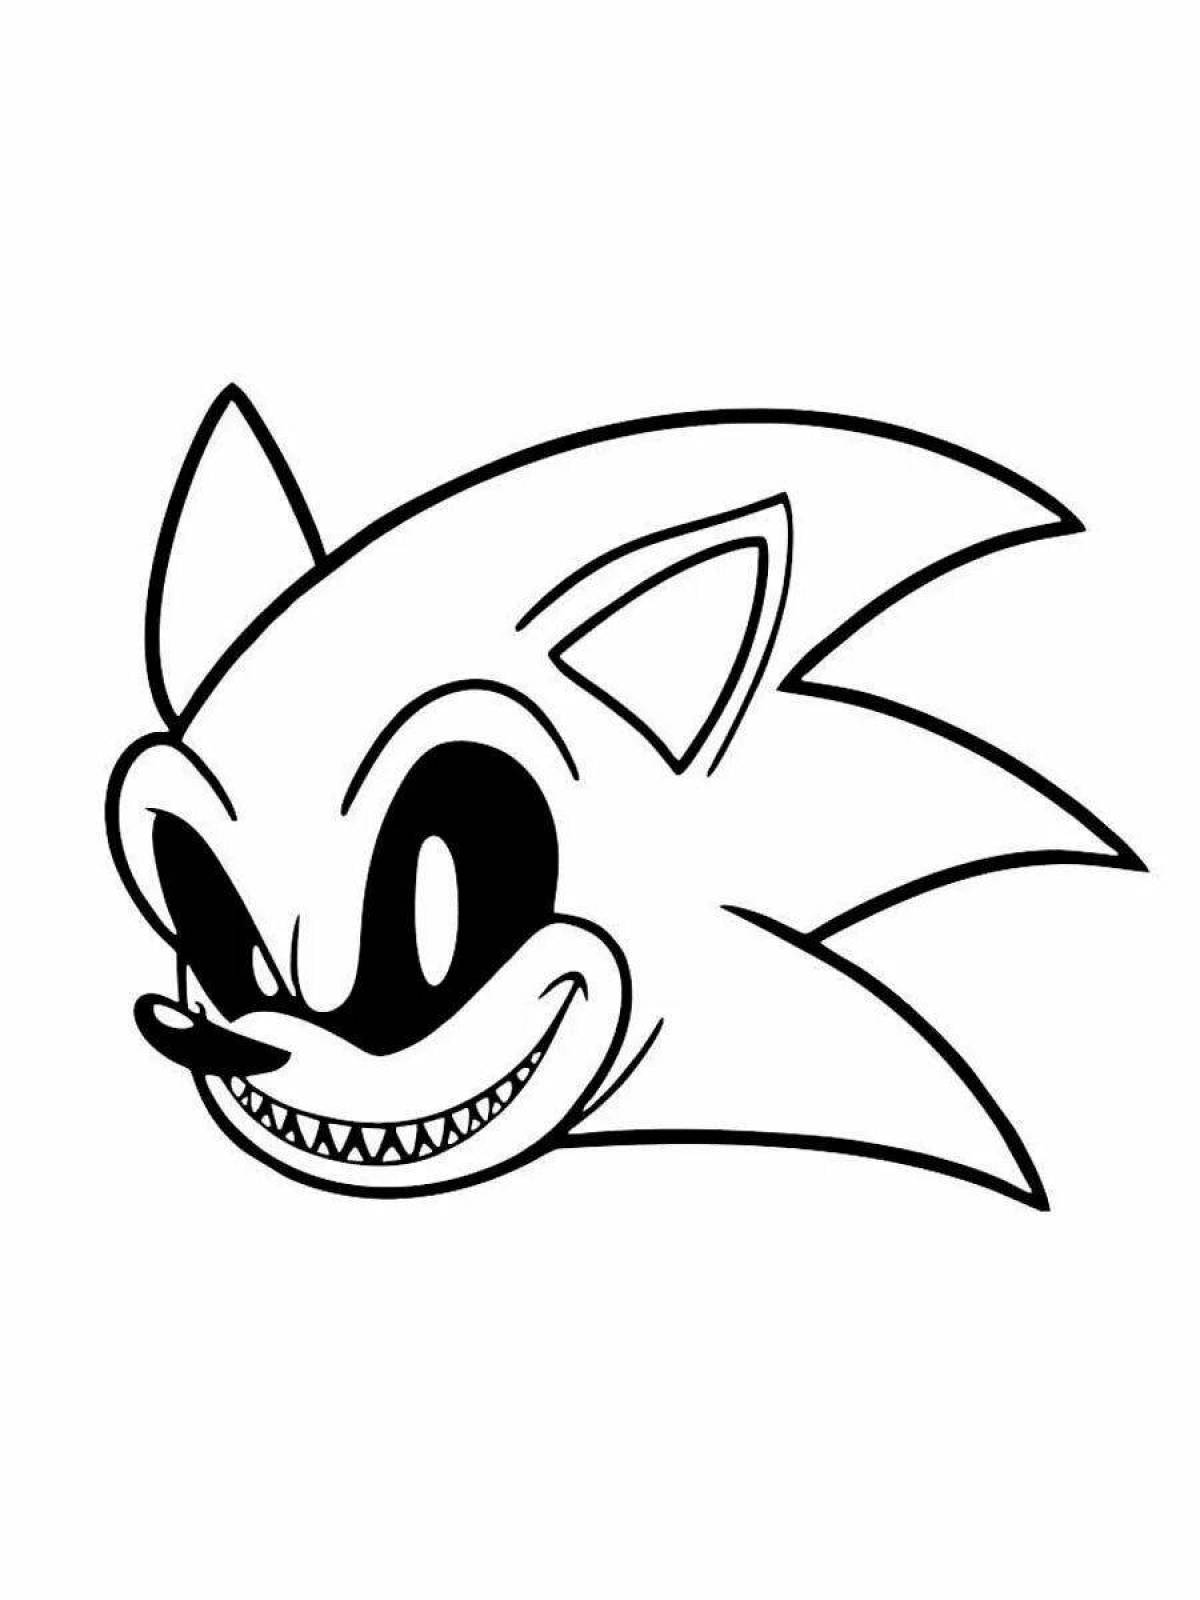 Playful sonic exe coloring book for kids